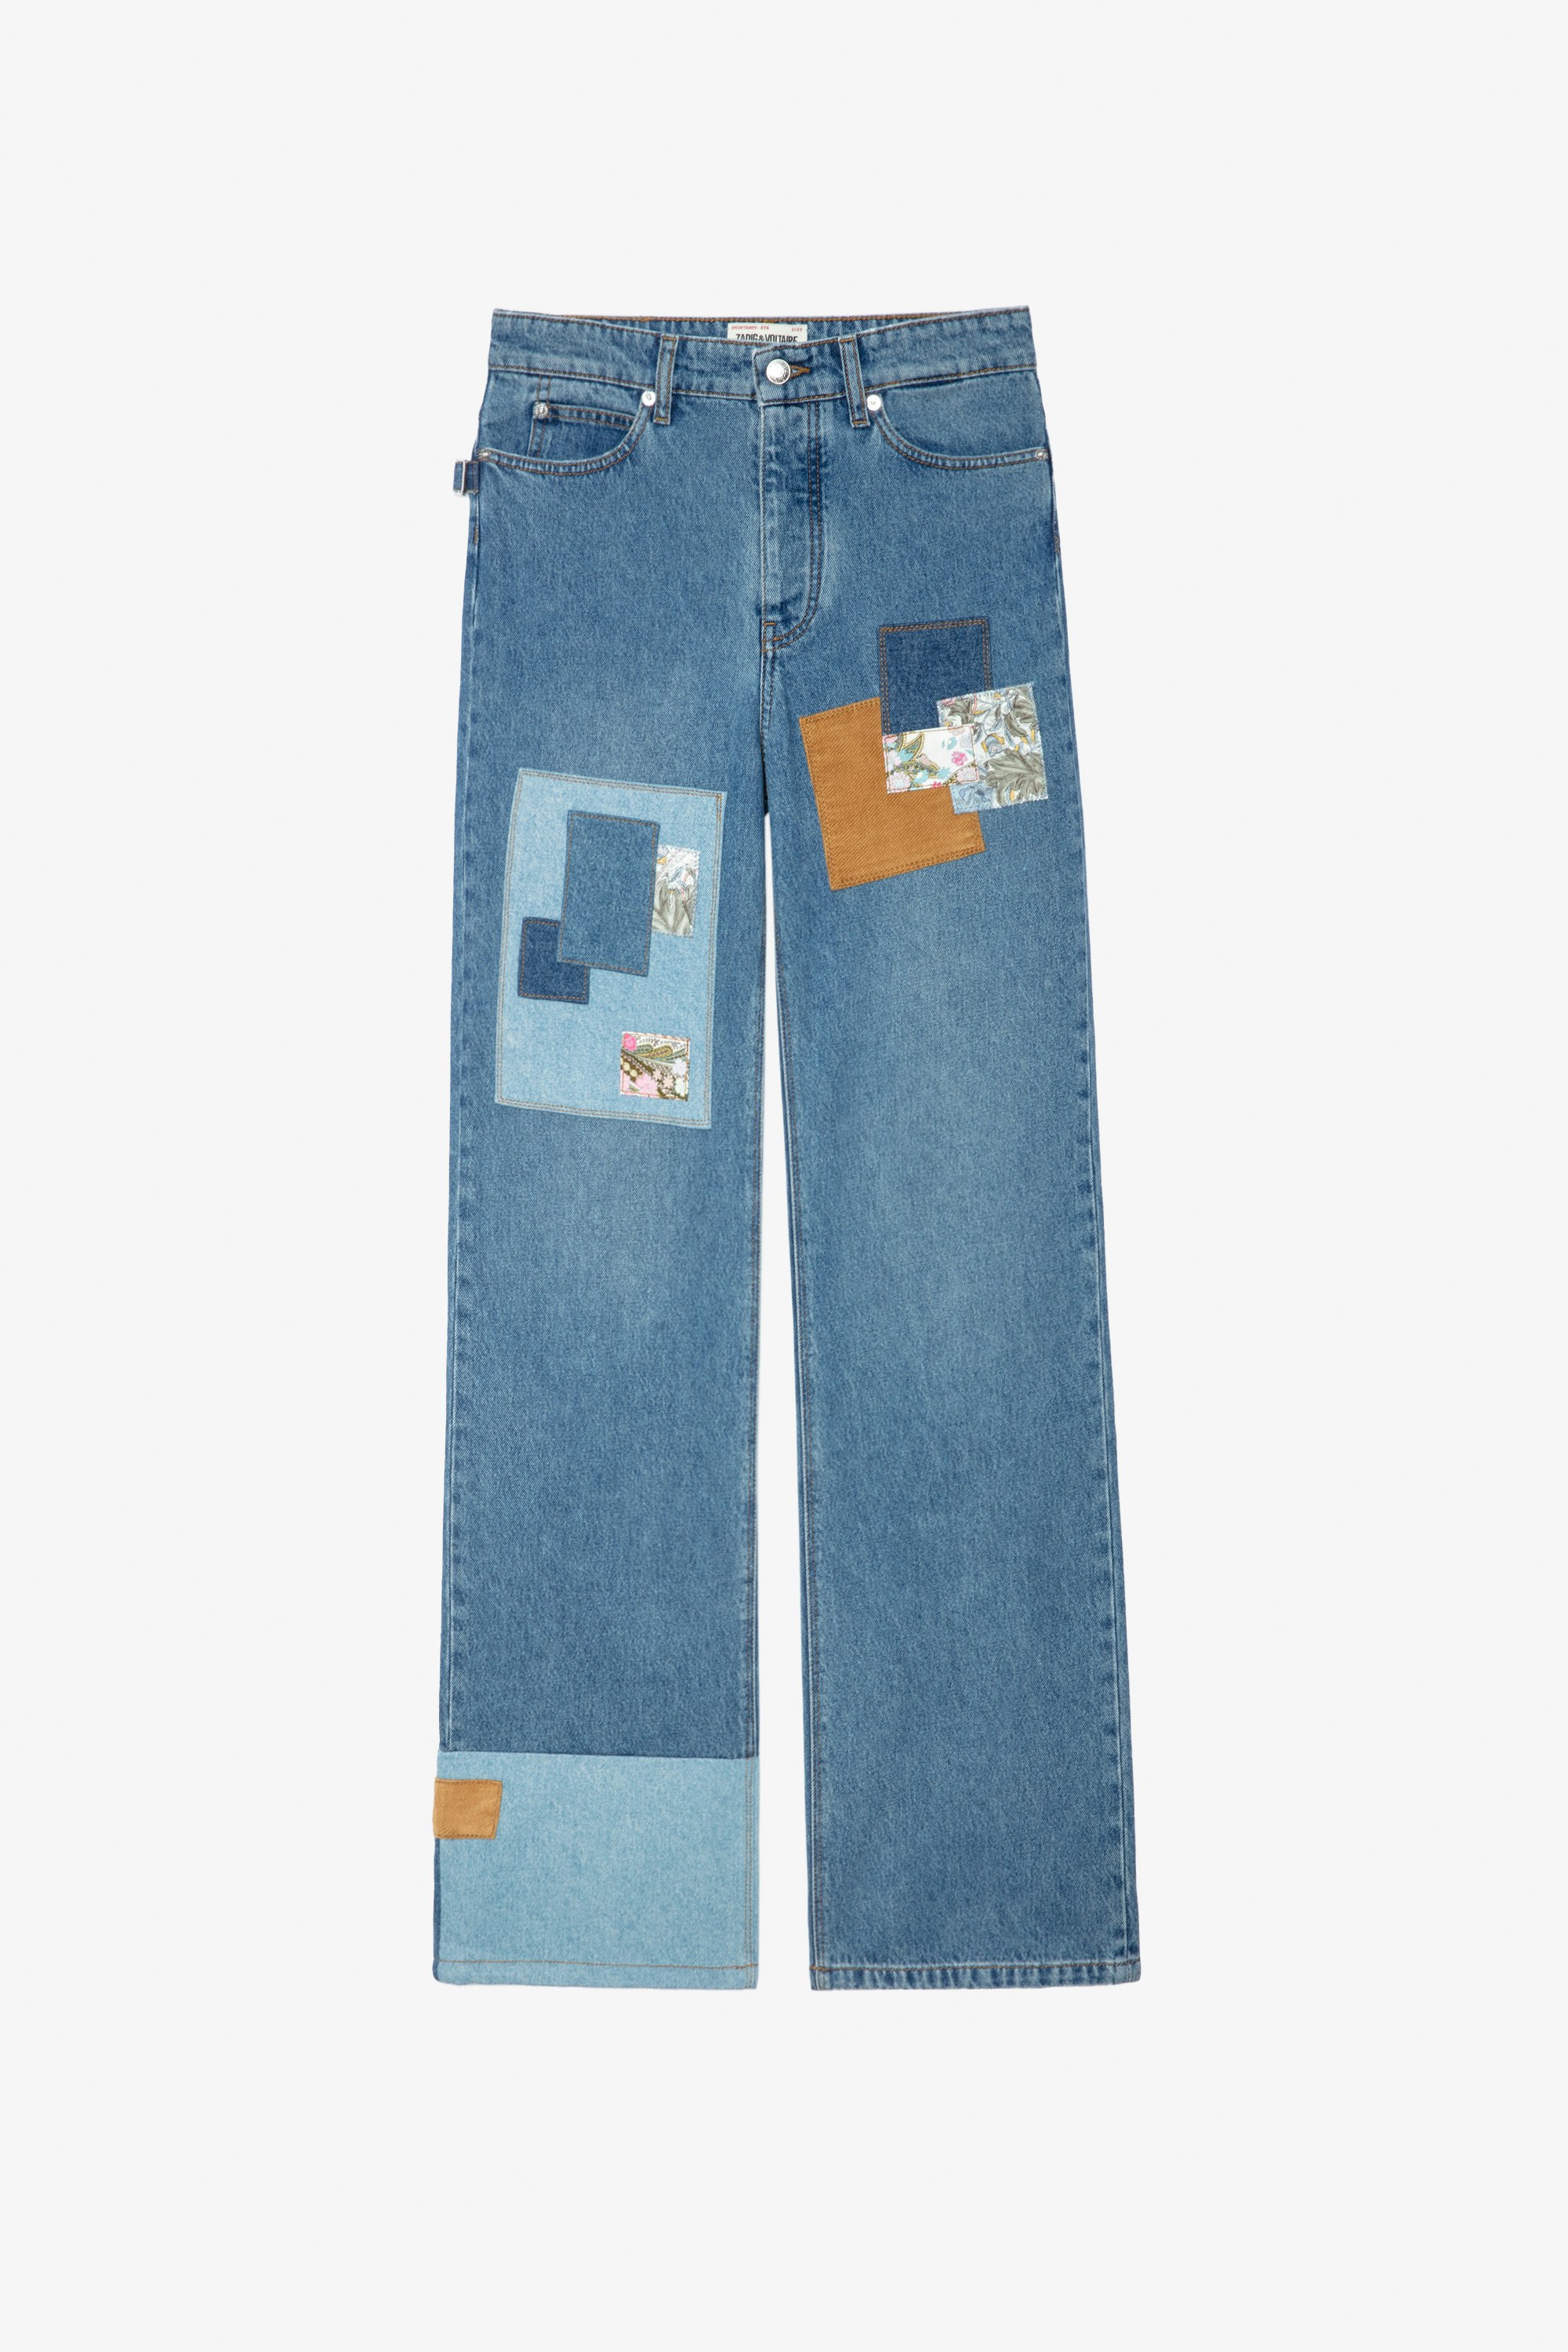 Evy Jeans Women’s faded denim jeans with plain and floral patches